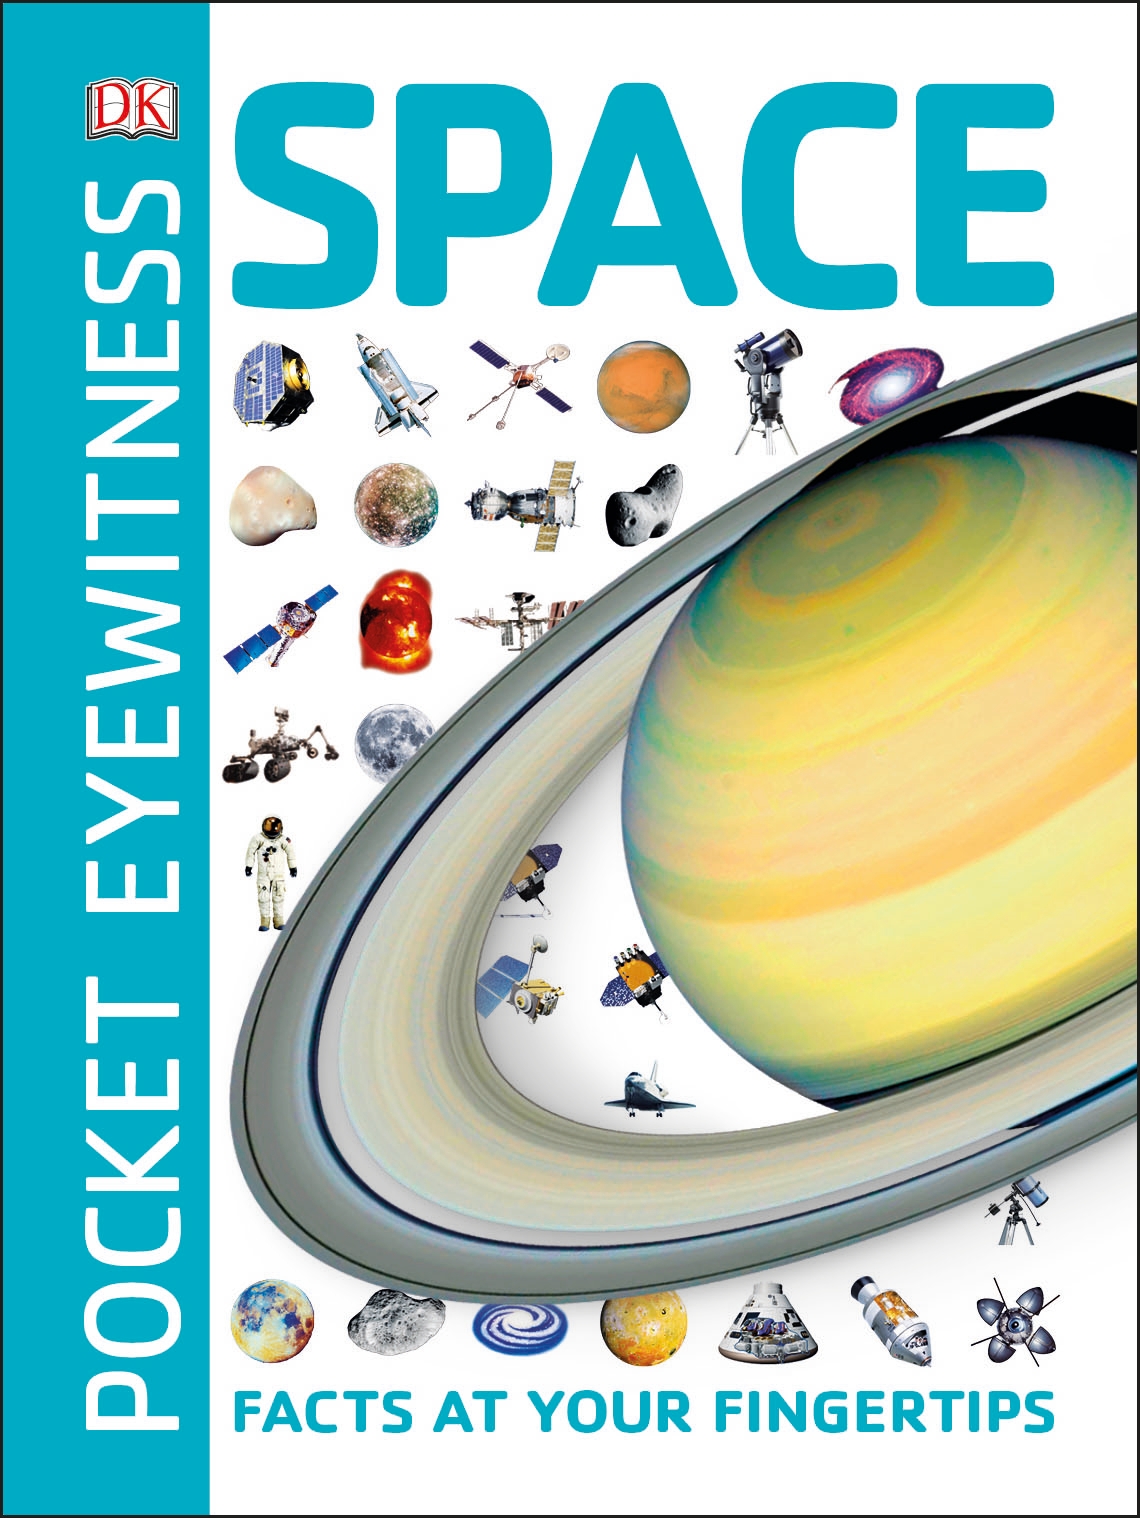 Pocket Eyewitness Space Facts at Your Fingertips by DK Penguin Random House South Africa